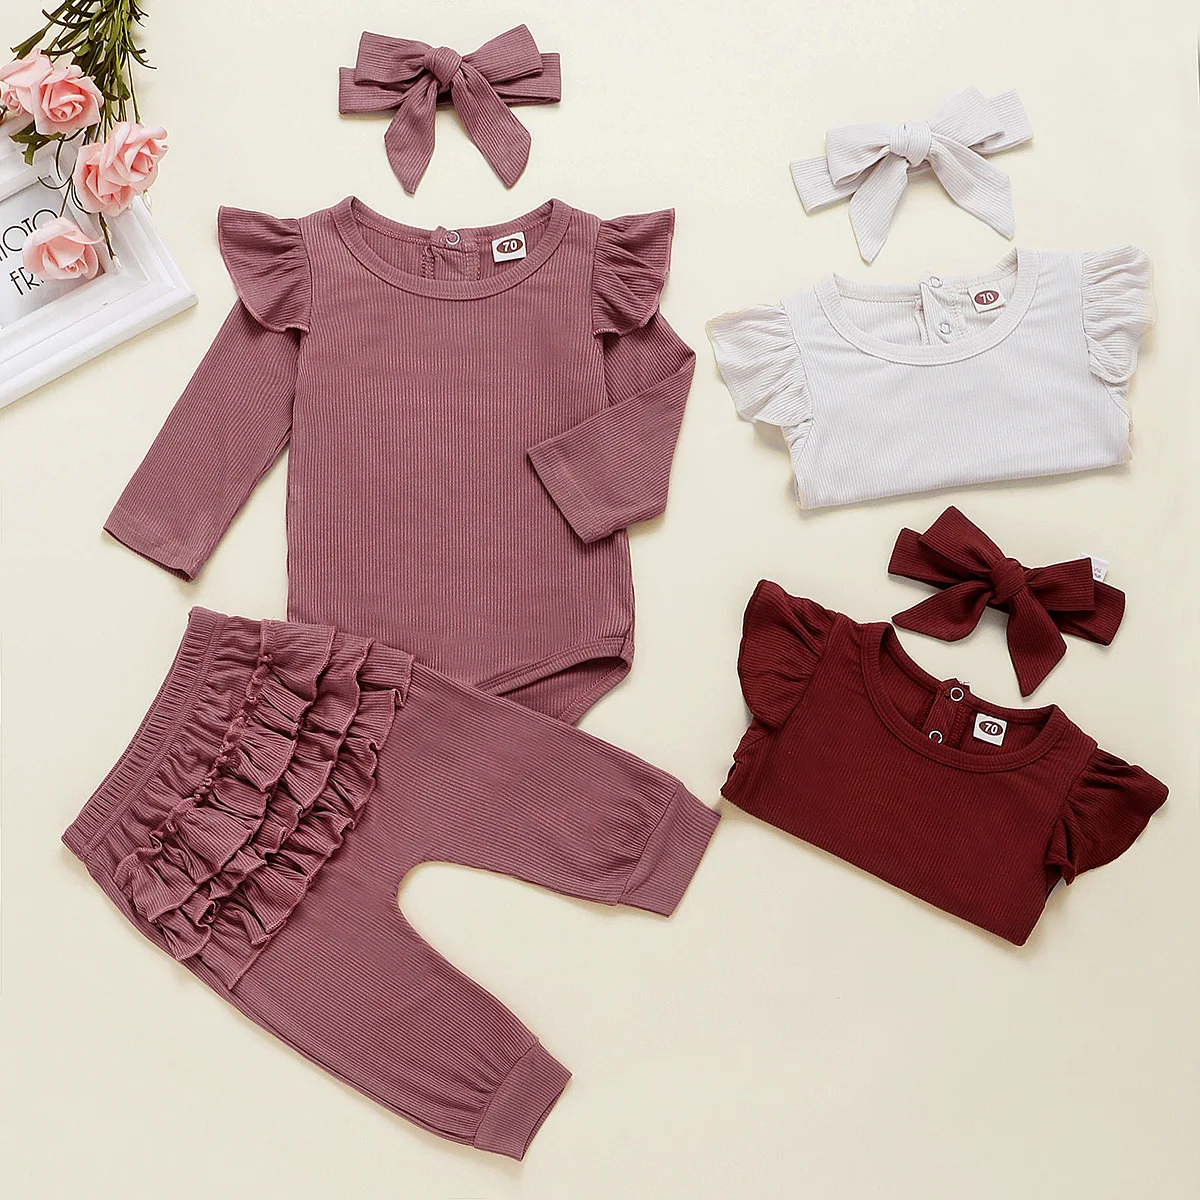 Newborn Baby Girl Clothes Set Autumn Casual Infant Outfits Long Sleeve Romper Ruffle Legging Pants Knitting Toddler Clothing Set newborn baby girl clothes thanksgiving outfits infant girls clothing christmas fashion 2019 floral ruffle pants babies clothes